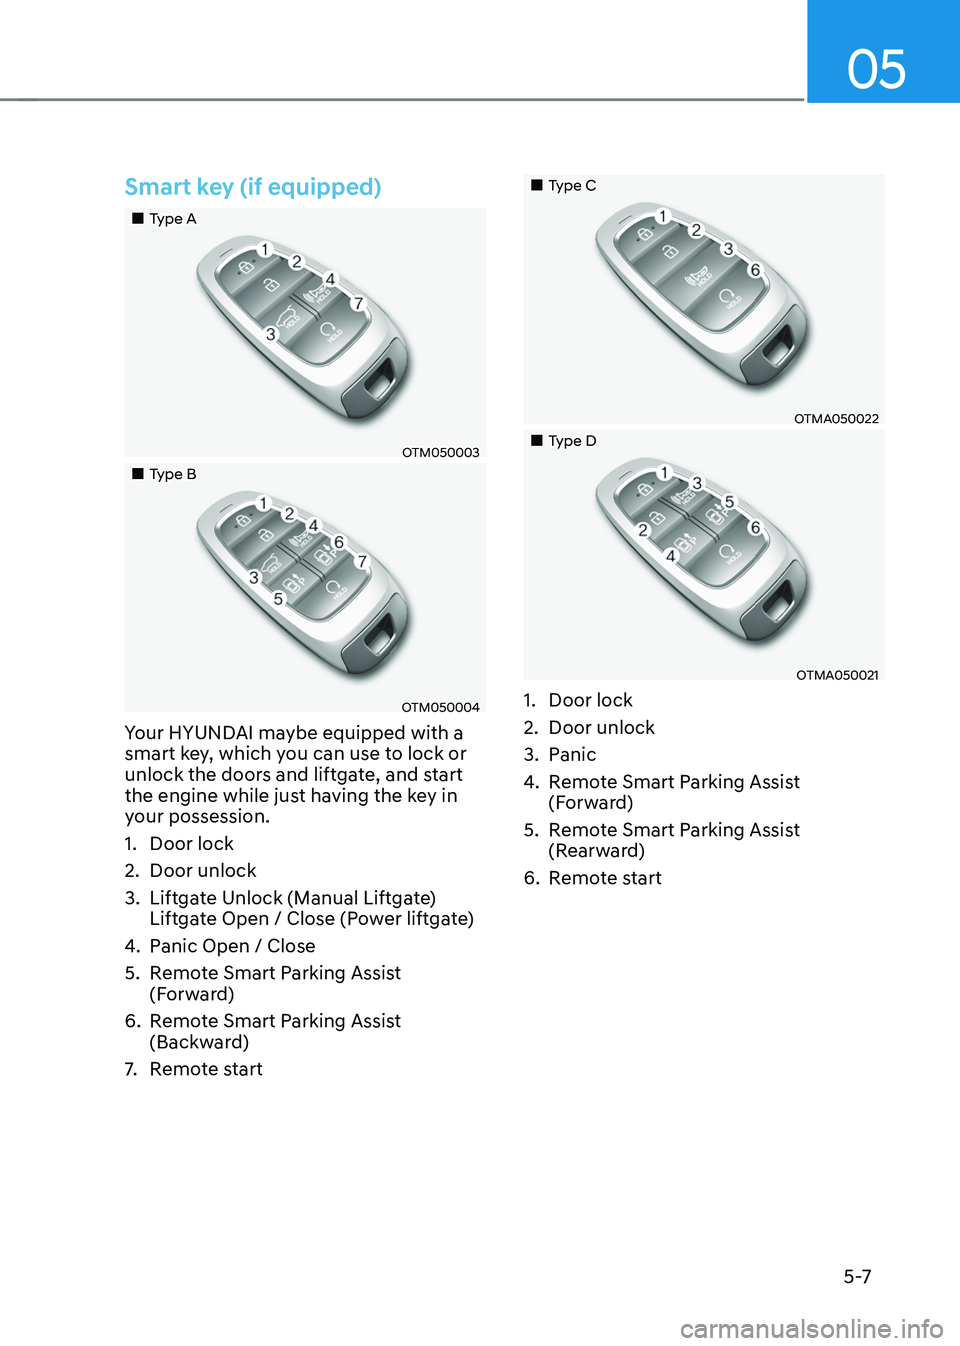 HYUNDAI TUCSON HYBRID 2022  Owners Manual 05
5 -7
Smart key (if equipped)
„„Type A
OTM050003
„„Type B
OTM050004
Your HYUNDAI maybe equipped with a 
smart key, which you can use to lock or 
unlock the doors and liftgate, an